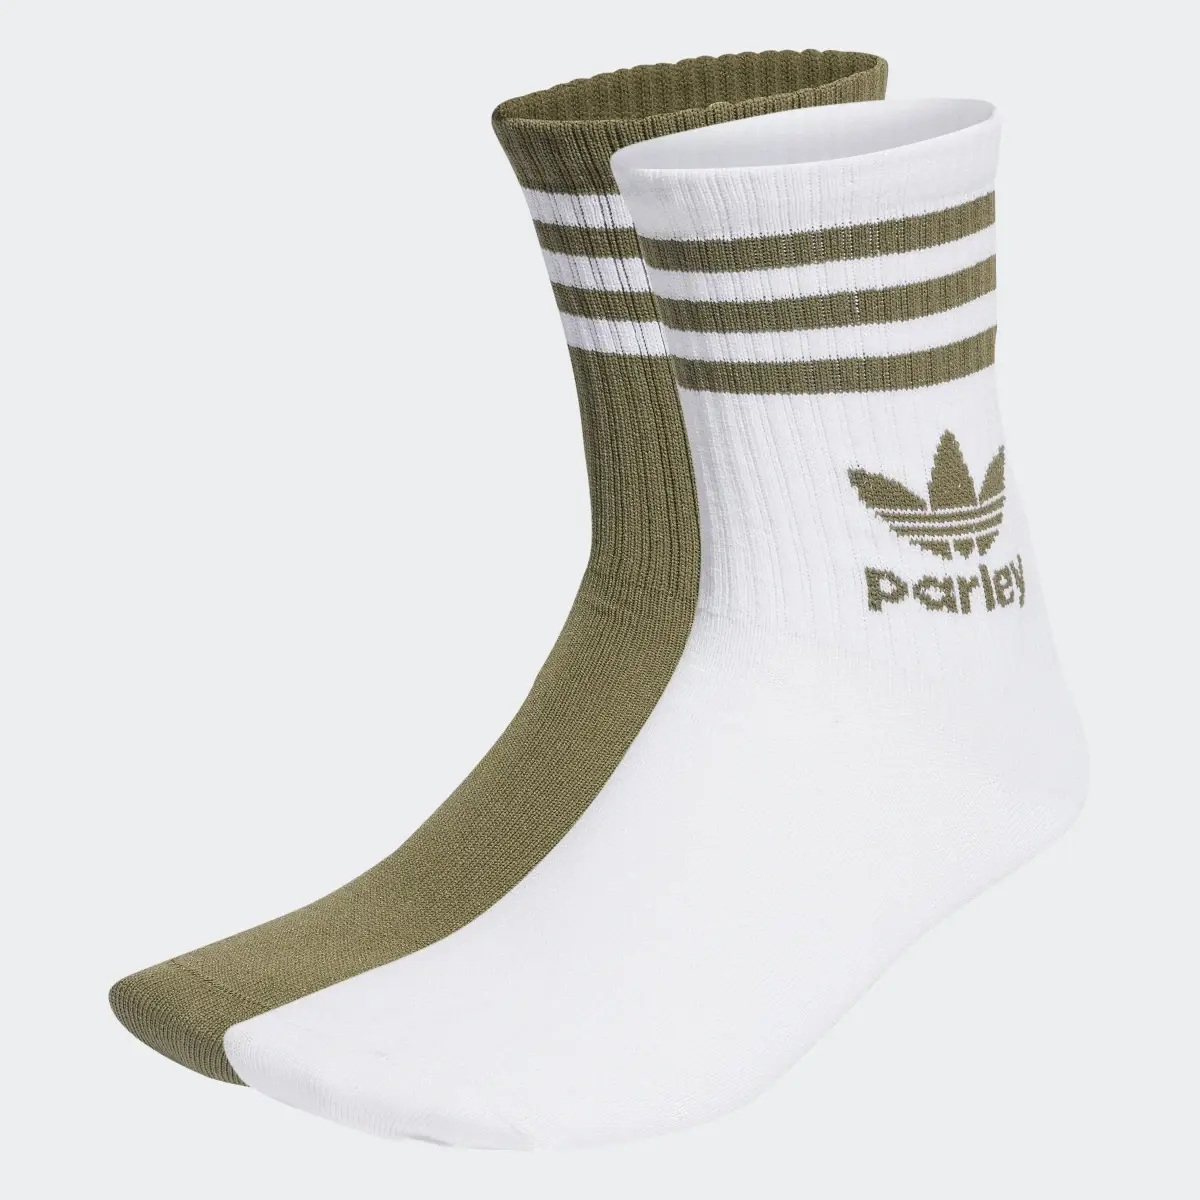 Adidas Chaussettes mi-mollet Parley (2 paires). 2